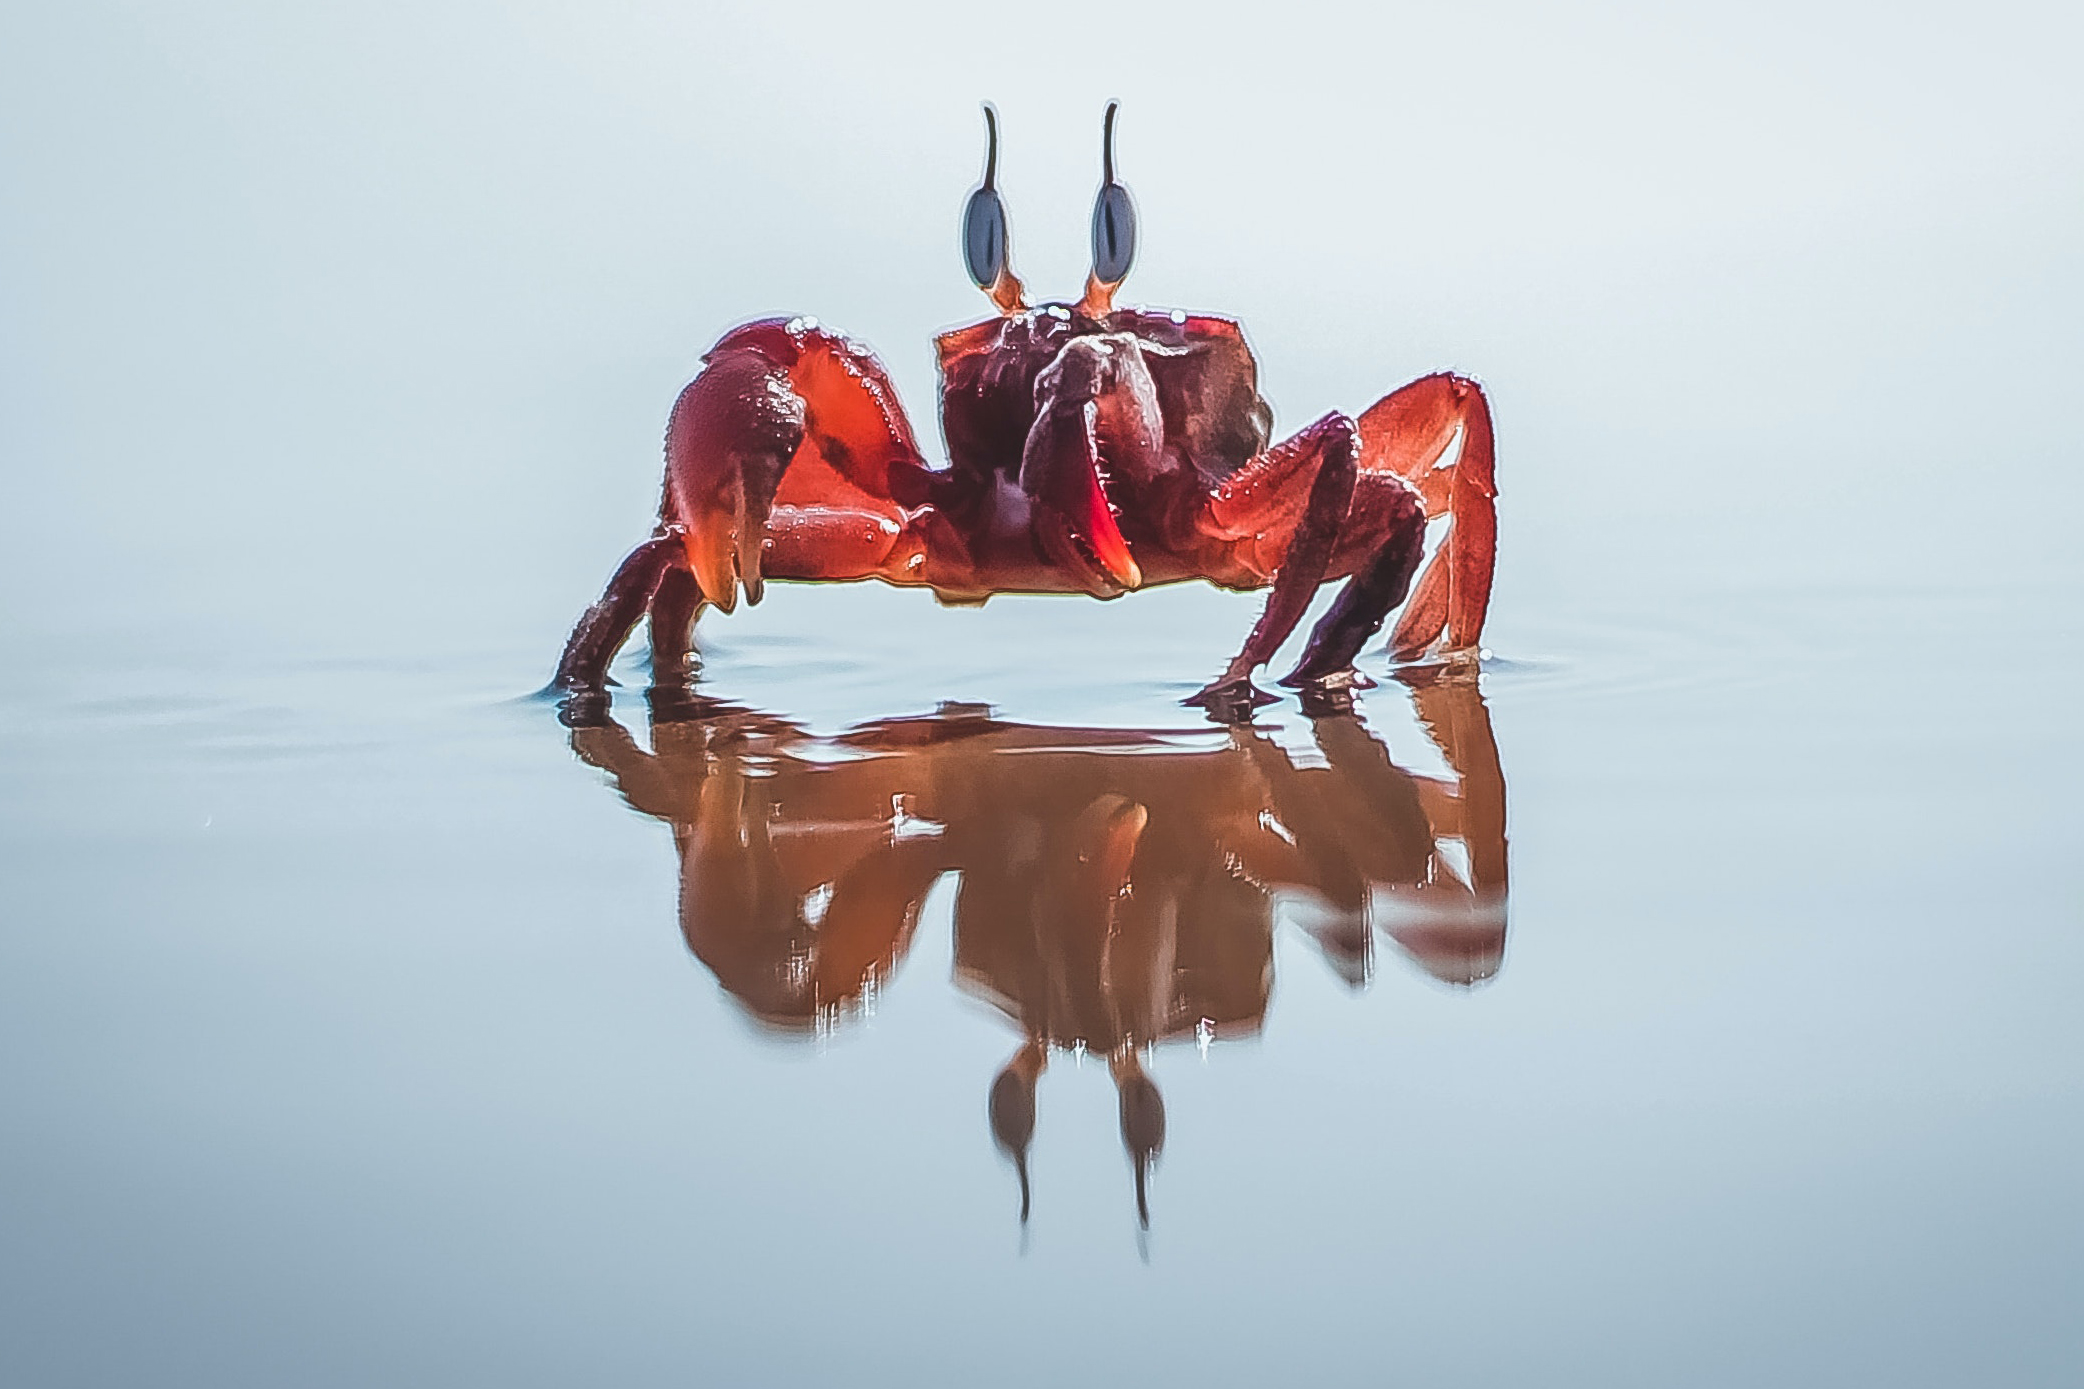 A crab walks along wet sand, with its reflection in the water.